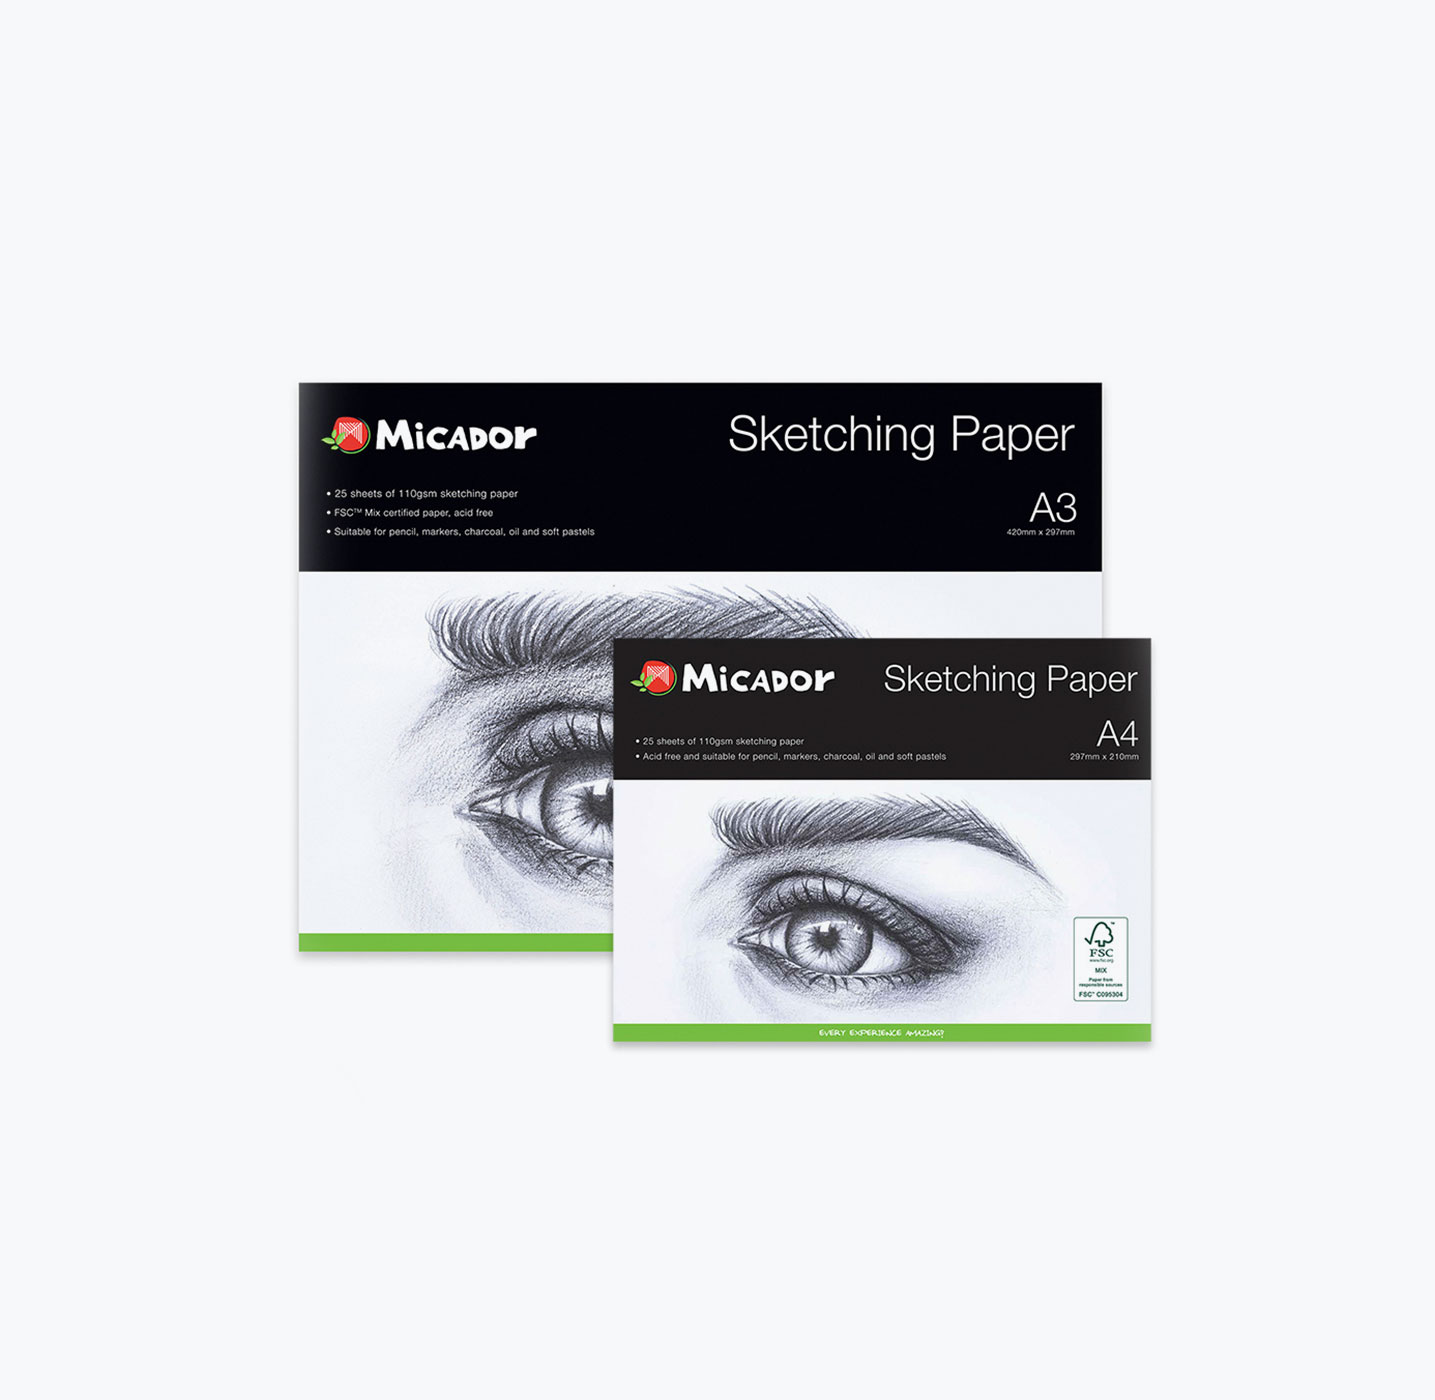 Micador® early stART® A3 Painting Paper Pad